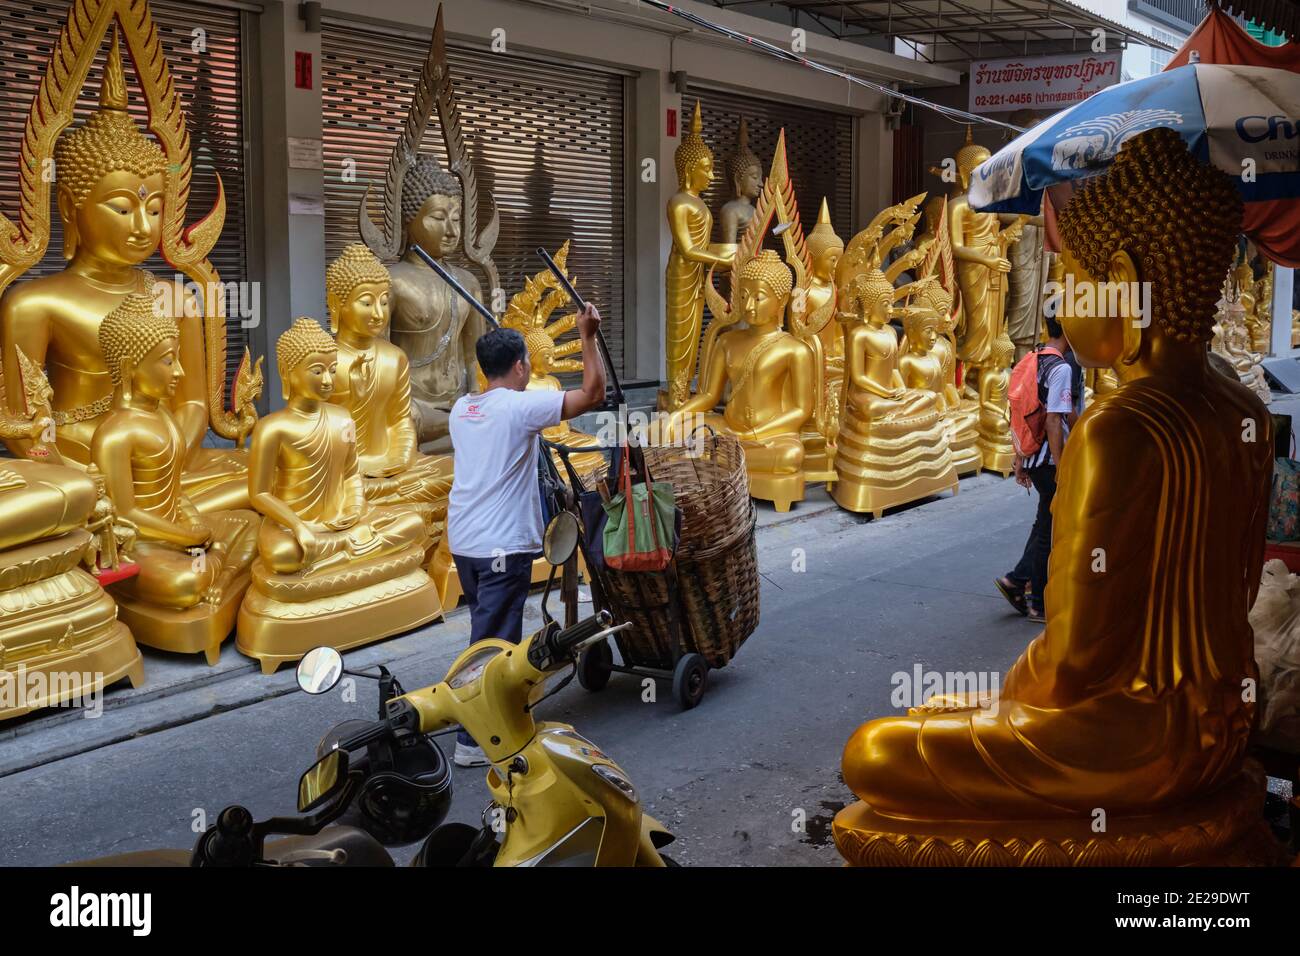 A man with a pushcart passes Buddha statues in front of a factory for Buddha statues in Bamrung Muang Road, Bangkok, Thailand Stock Photo